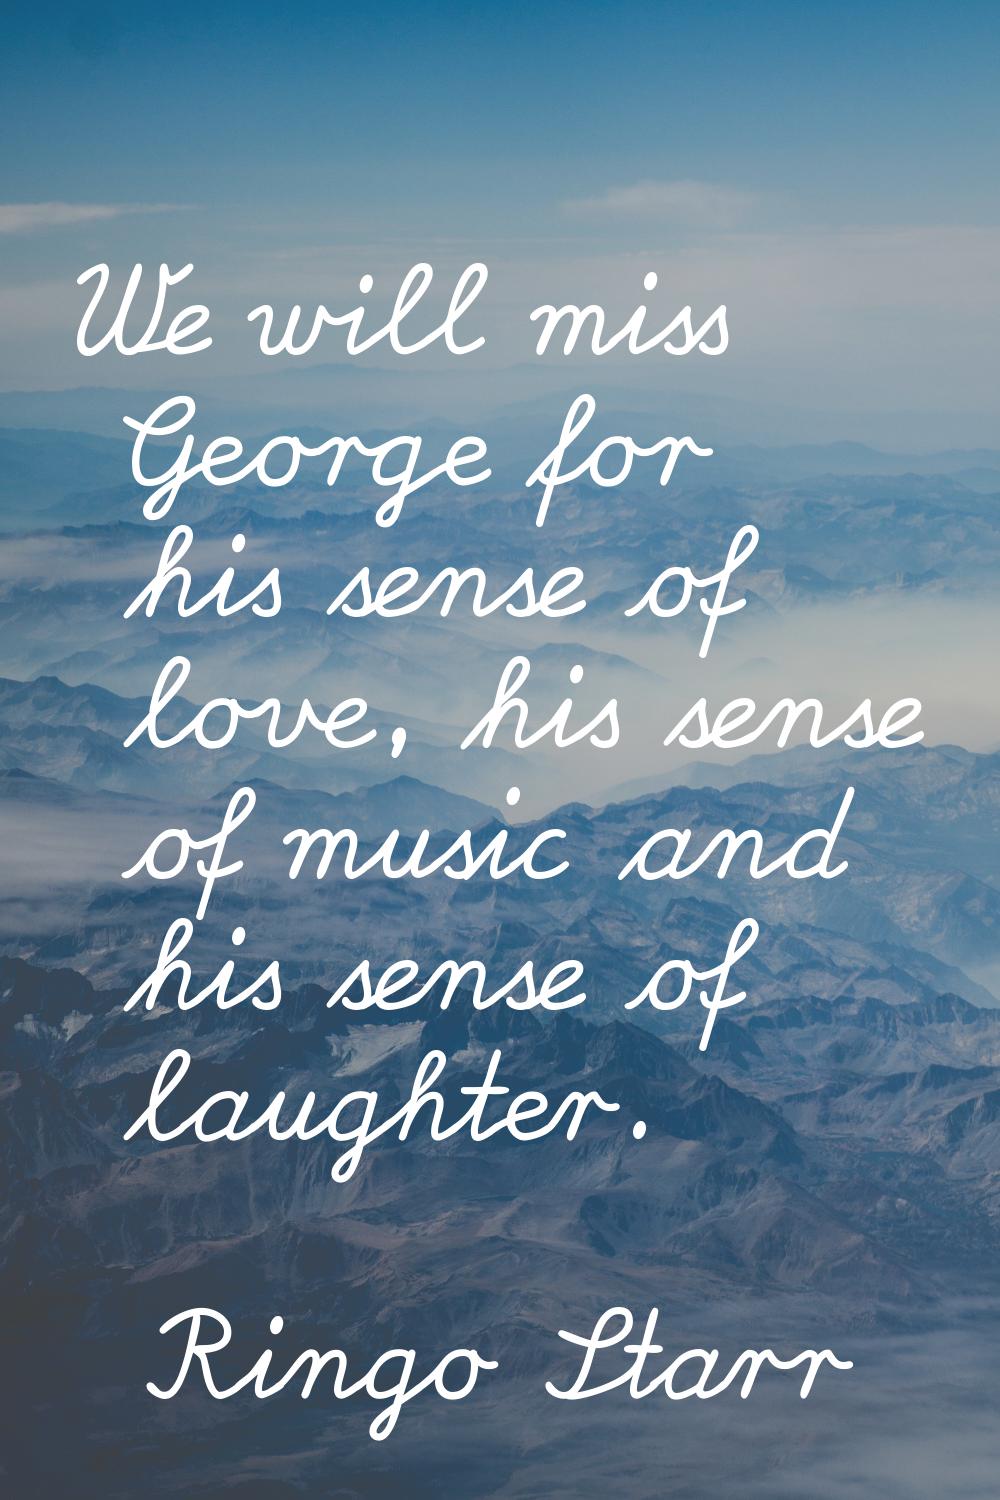 We will miss George for his sense of love, his sense of music and his sense of laughter.